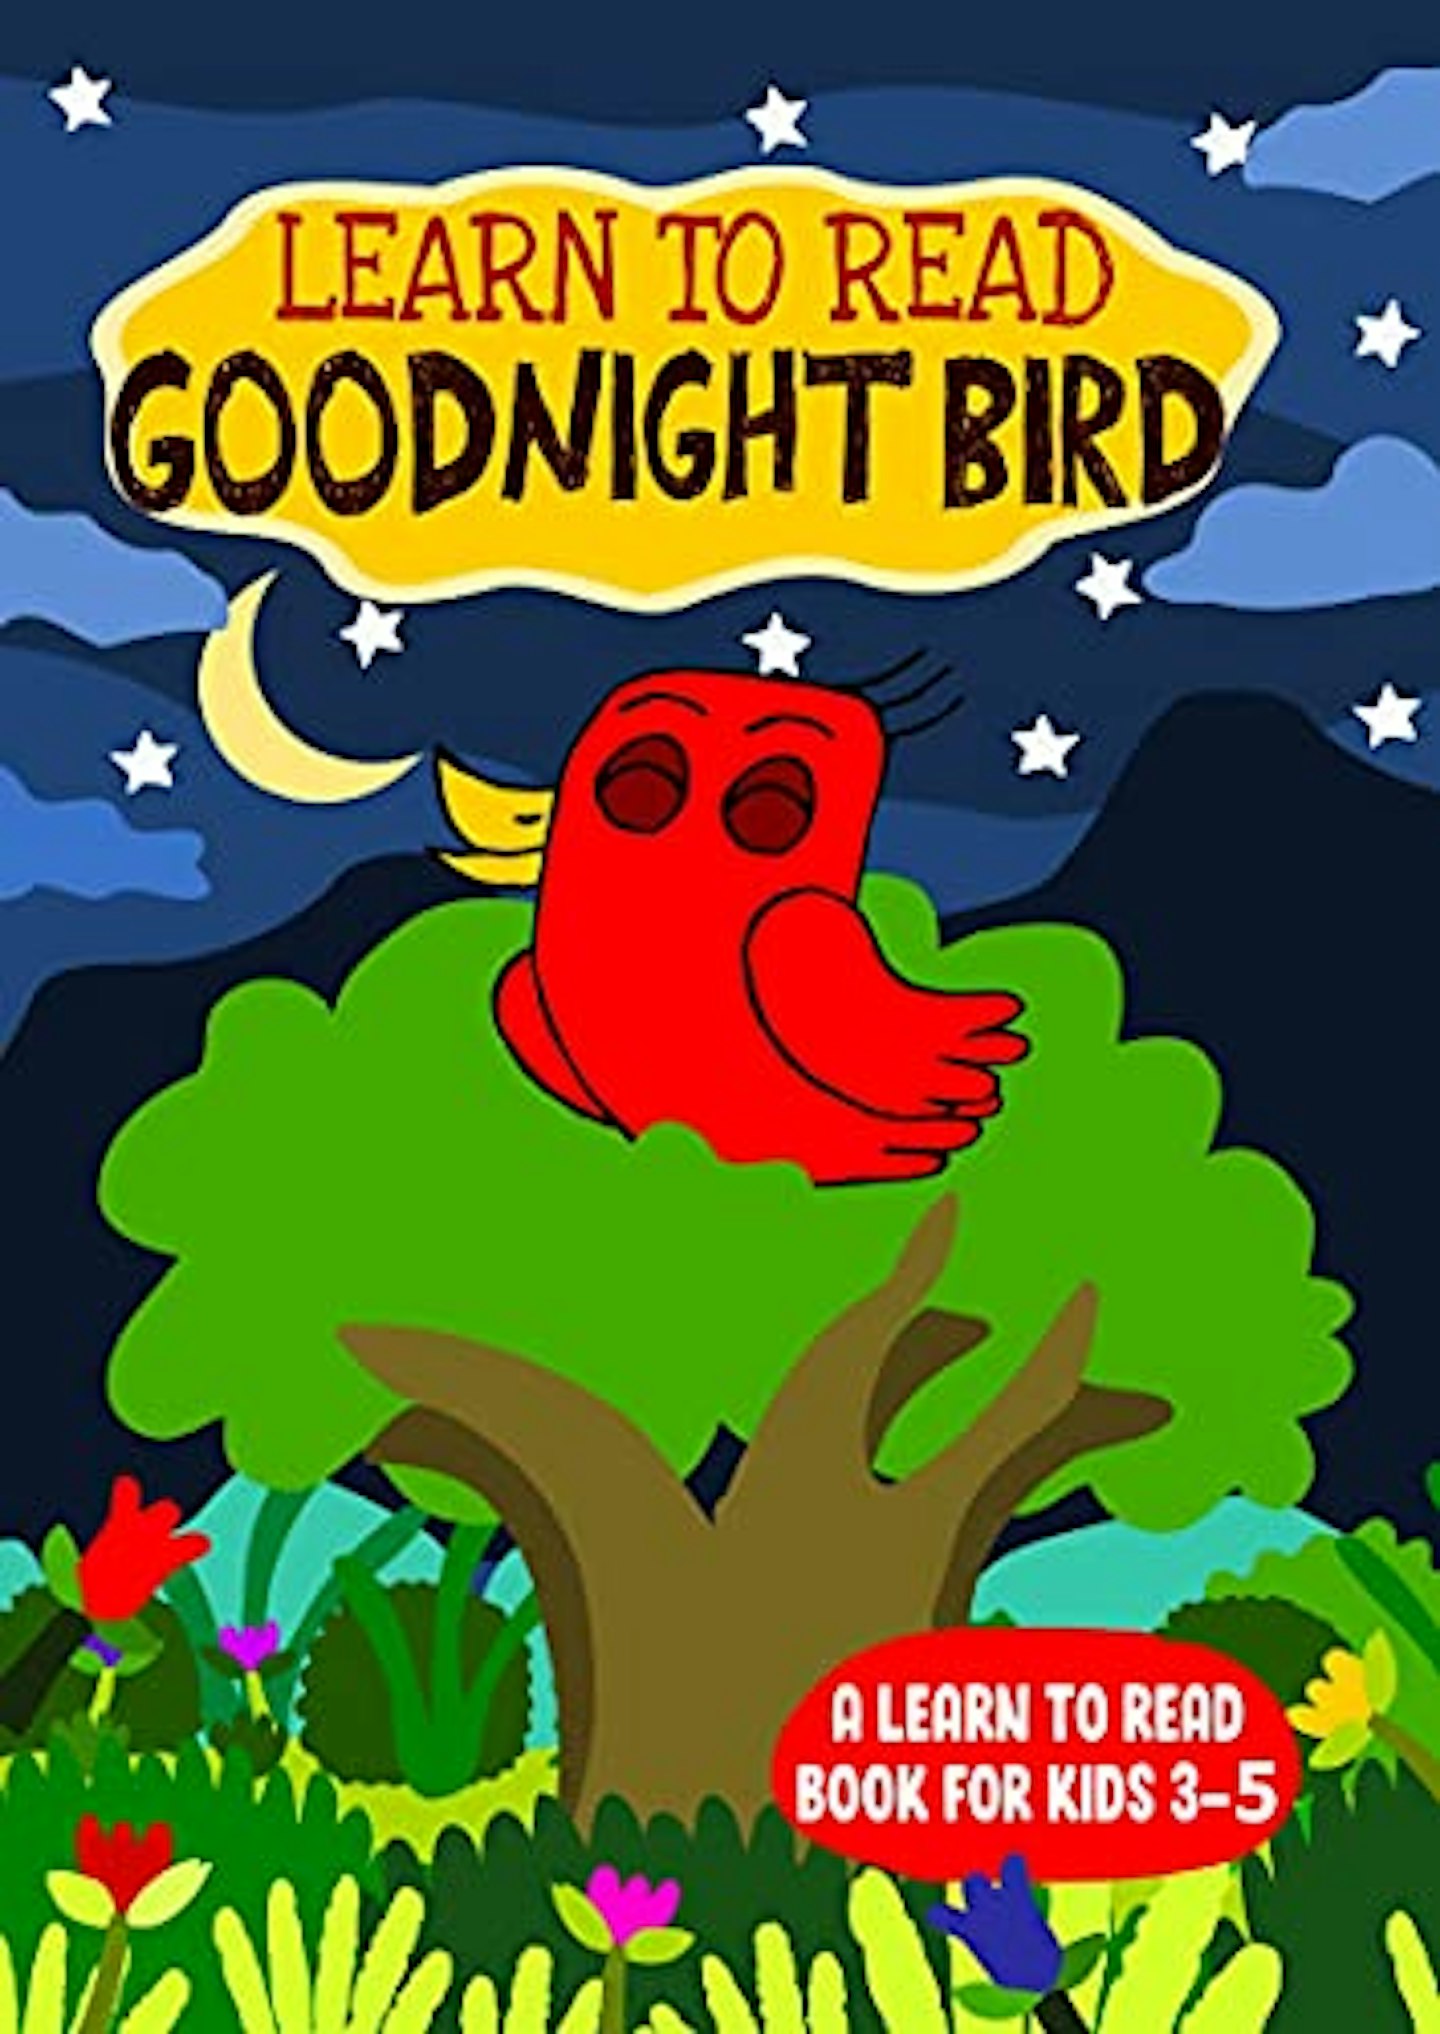 Learn to Read: Good Night Bird- A Learn to Read Book for Kids 3-5